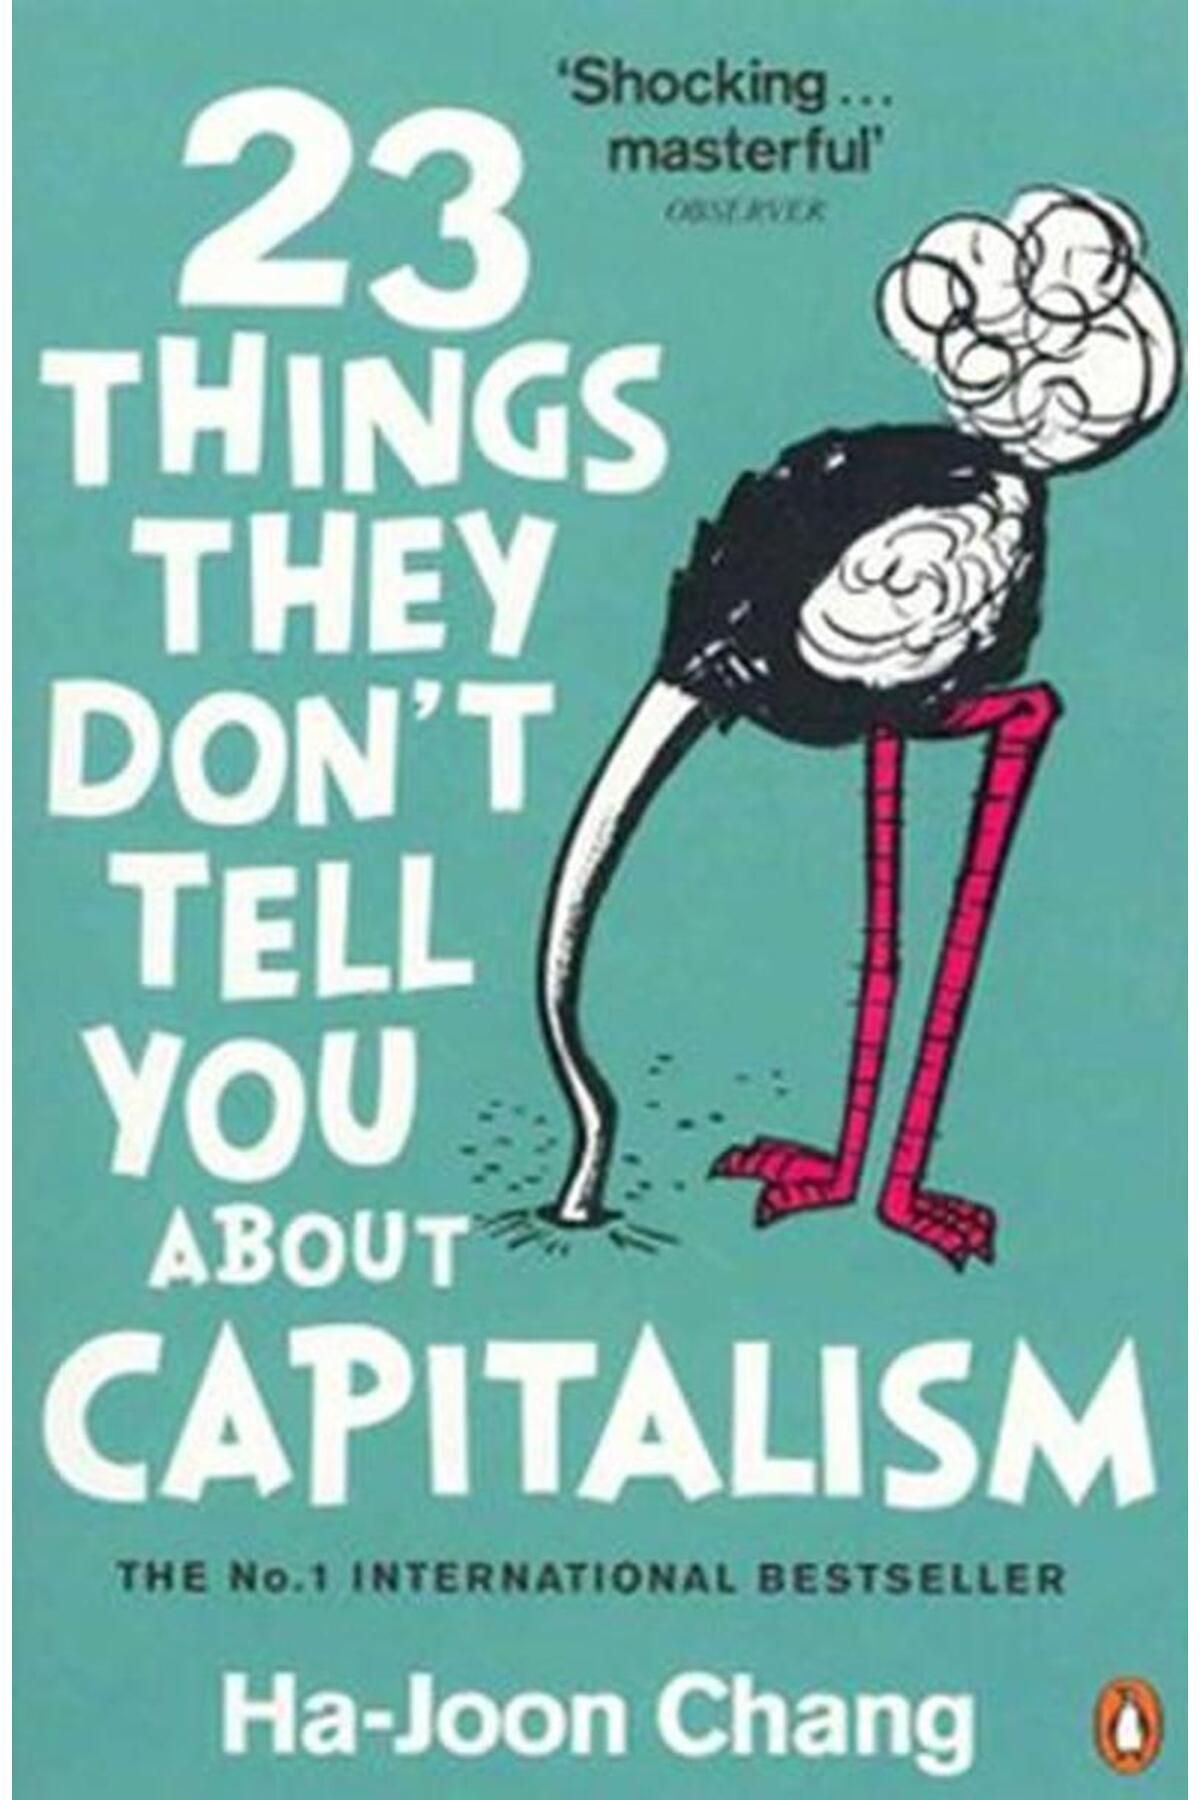 Penguin Books 23 Things They Don't Tell You About Capitalism